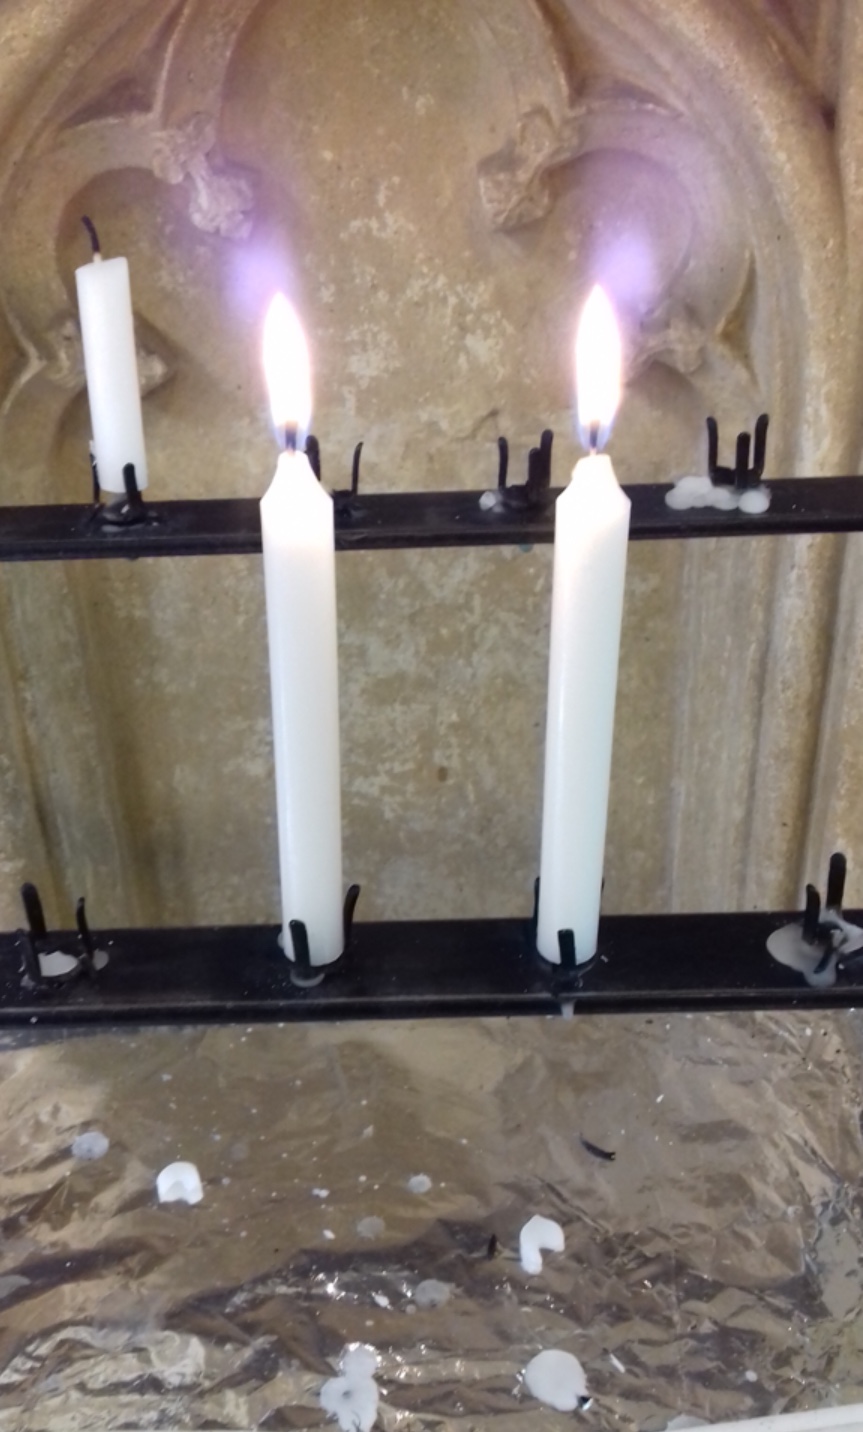 Salut d'Amour: Candles at Malmesbury Abbey in the Cotswolds and words from Angie. Diddley’s oldest friend who grew up with her in the Cotswolds.